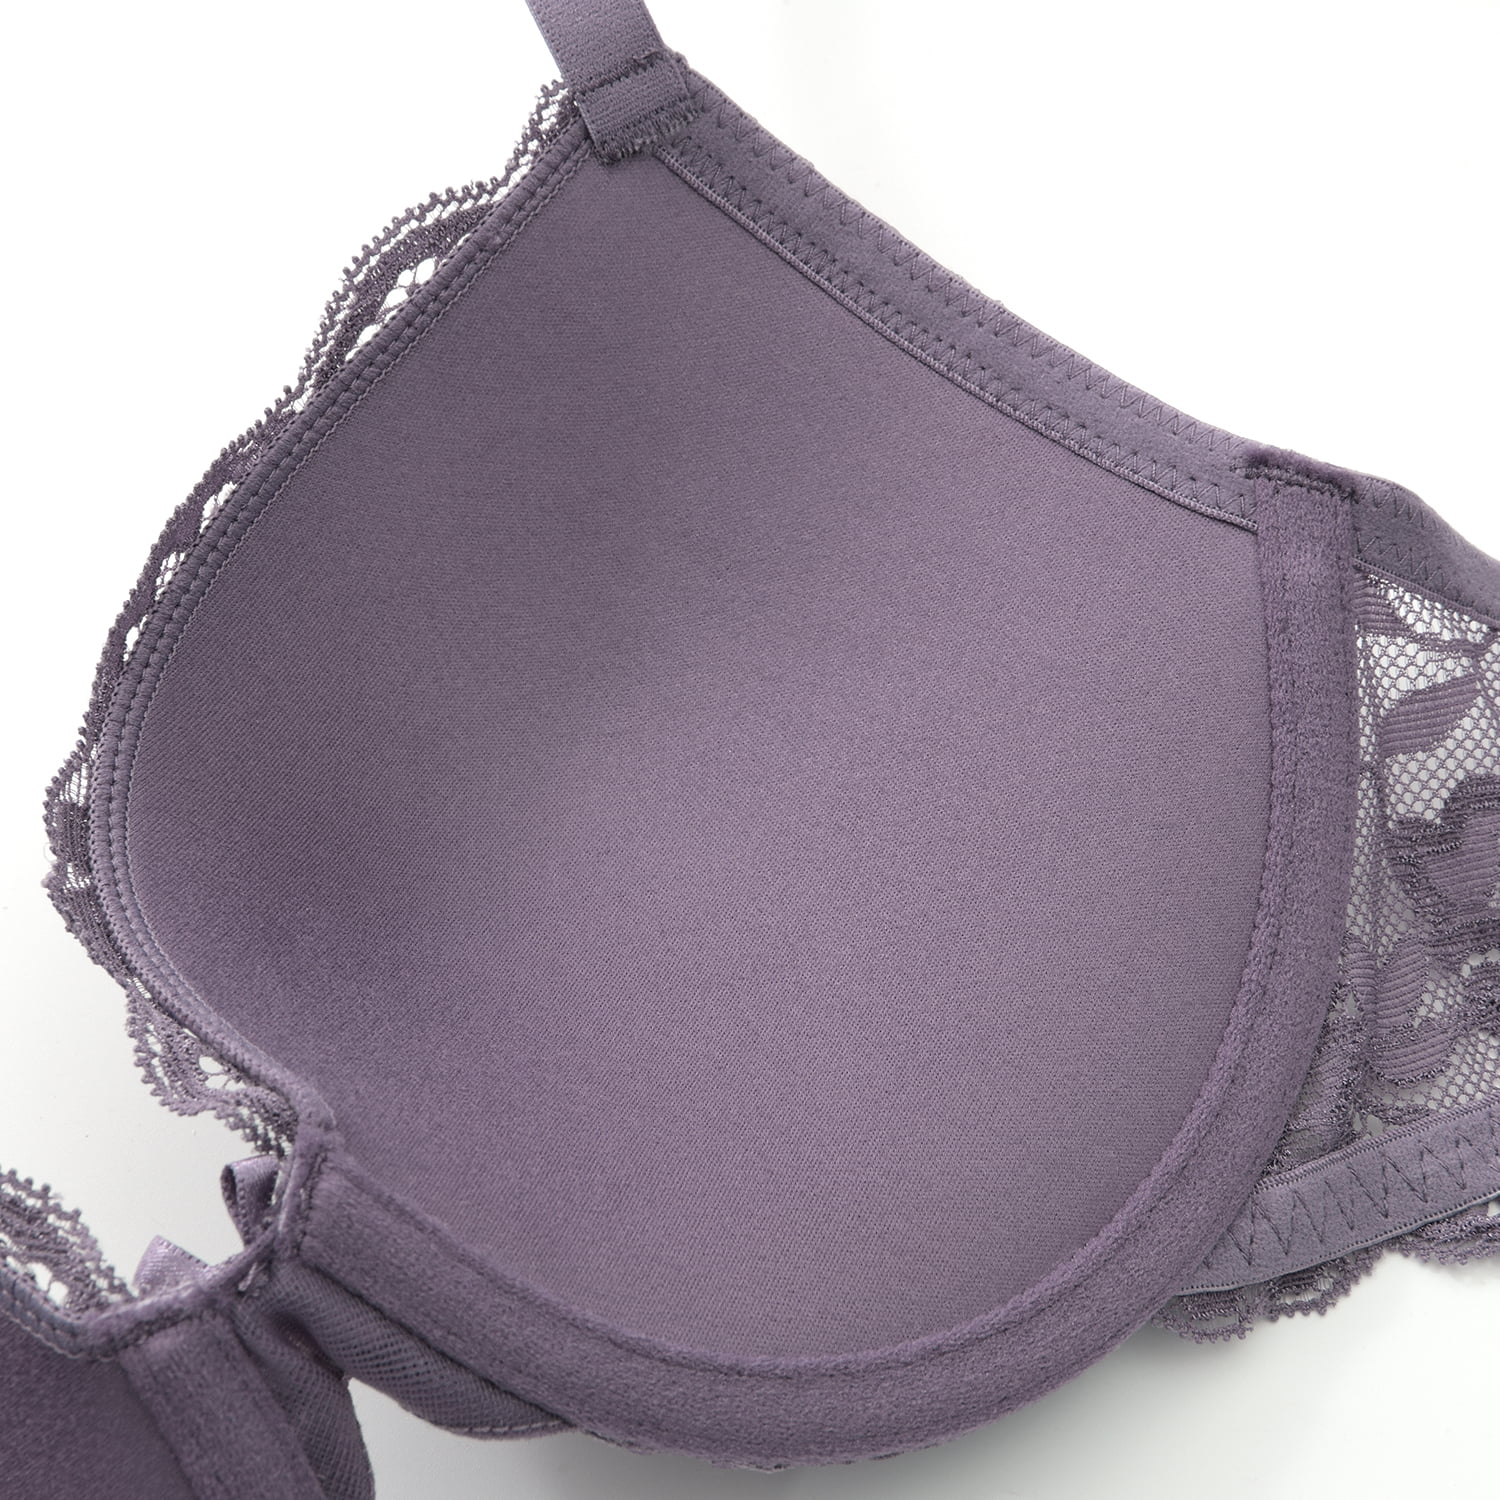 Wired Bras, Triumph, Natural Elegance Finesse Wired Padded Bra